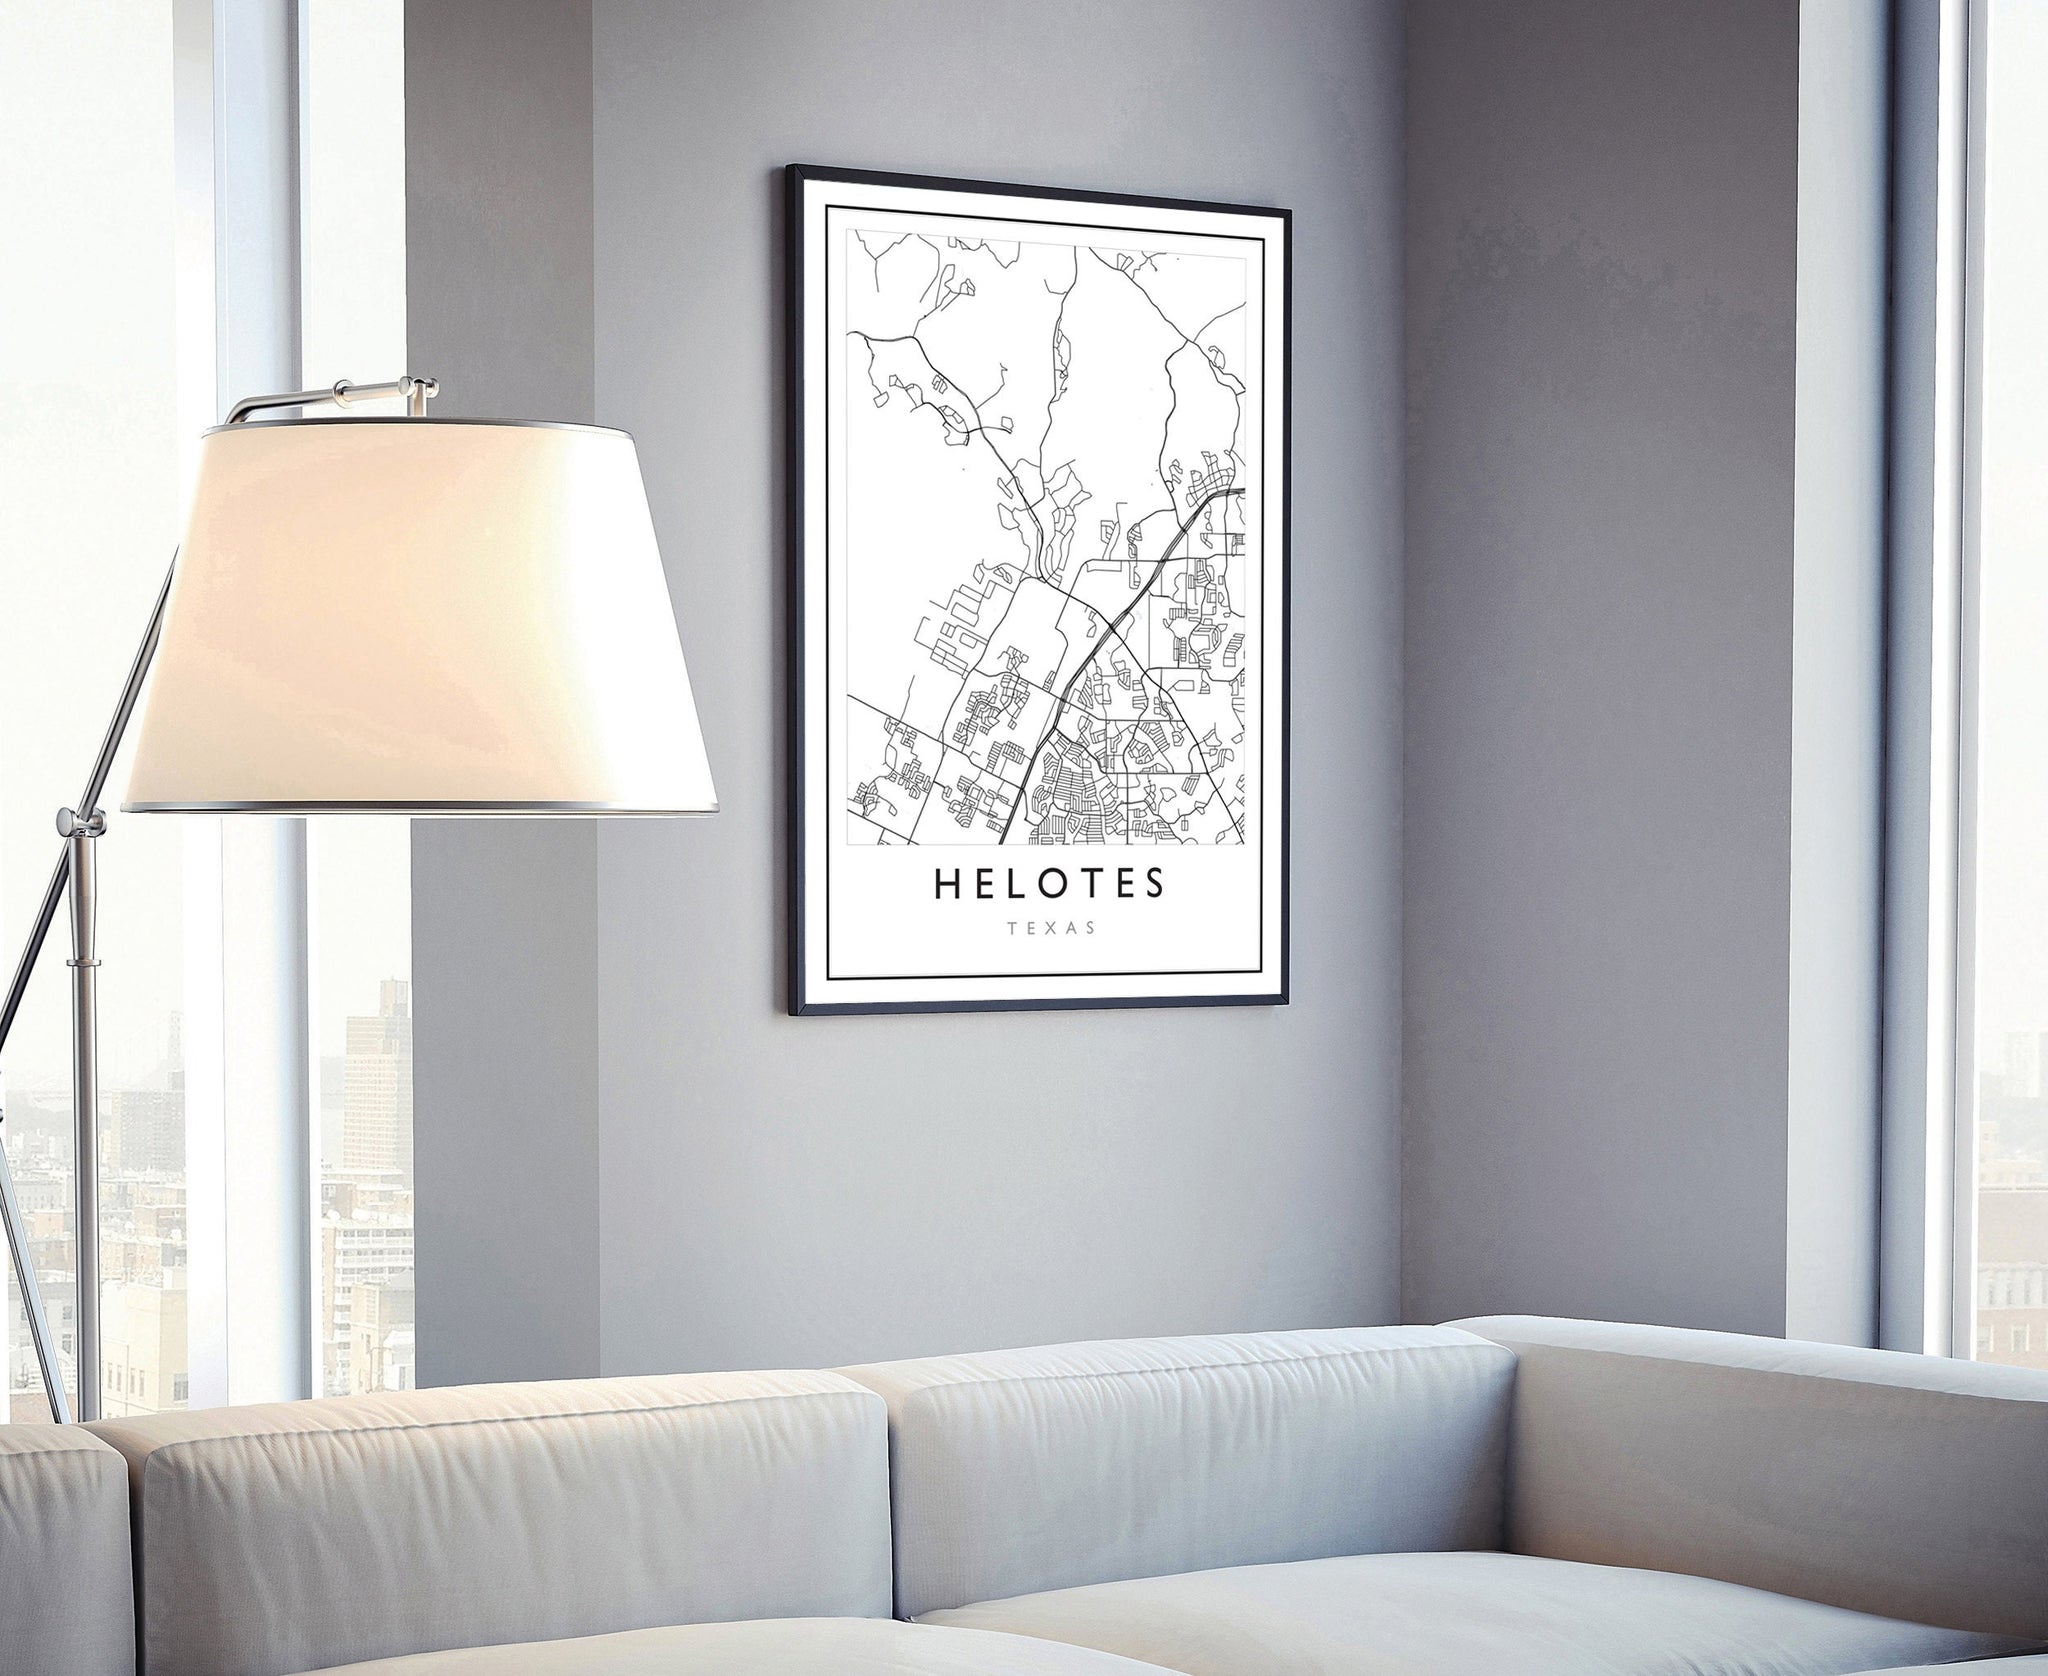 Helotes Texas City Map, Helotes Texas City Road Map Poster, City Street Map Print, US City Modern City Map, Home Wall Decor, Office Wall Art